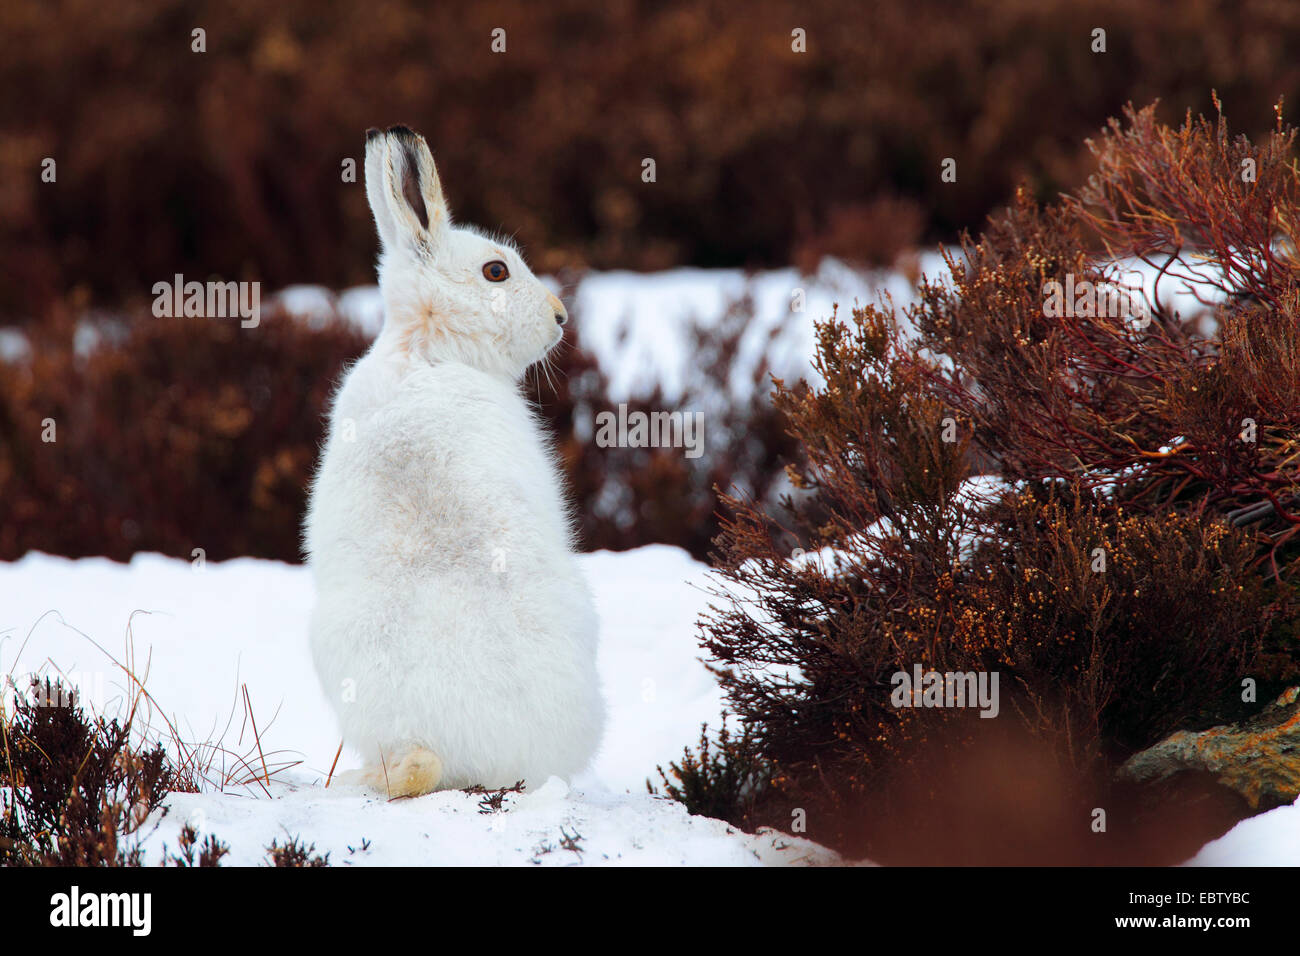 blue hare, mountain hare, white hare, Eurasian Arctic hare (Lepus timidus), sitting in snow in winter fur, United Kingdom, Scotland, Cairngorms National Park Stock Photo